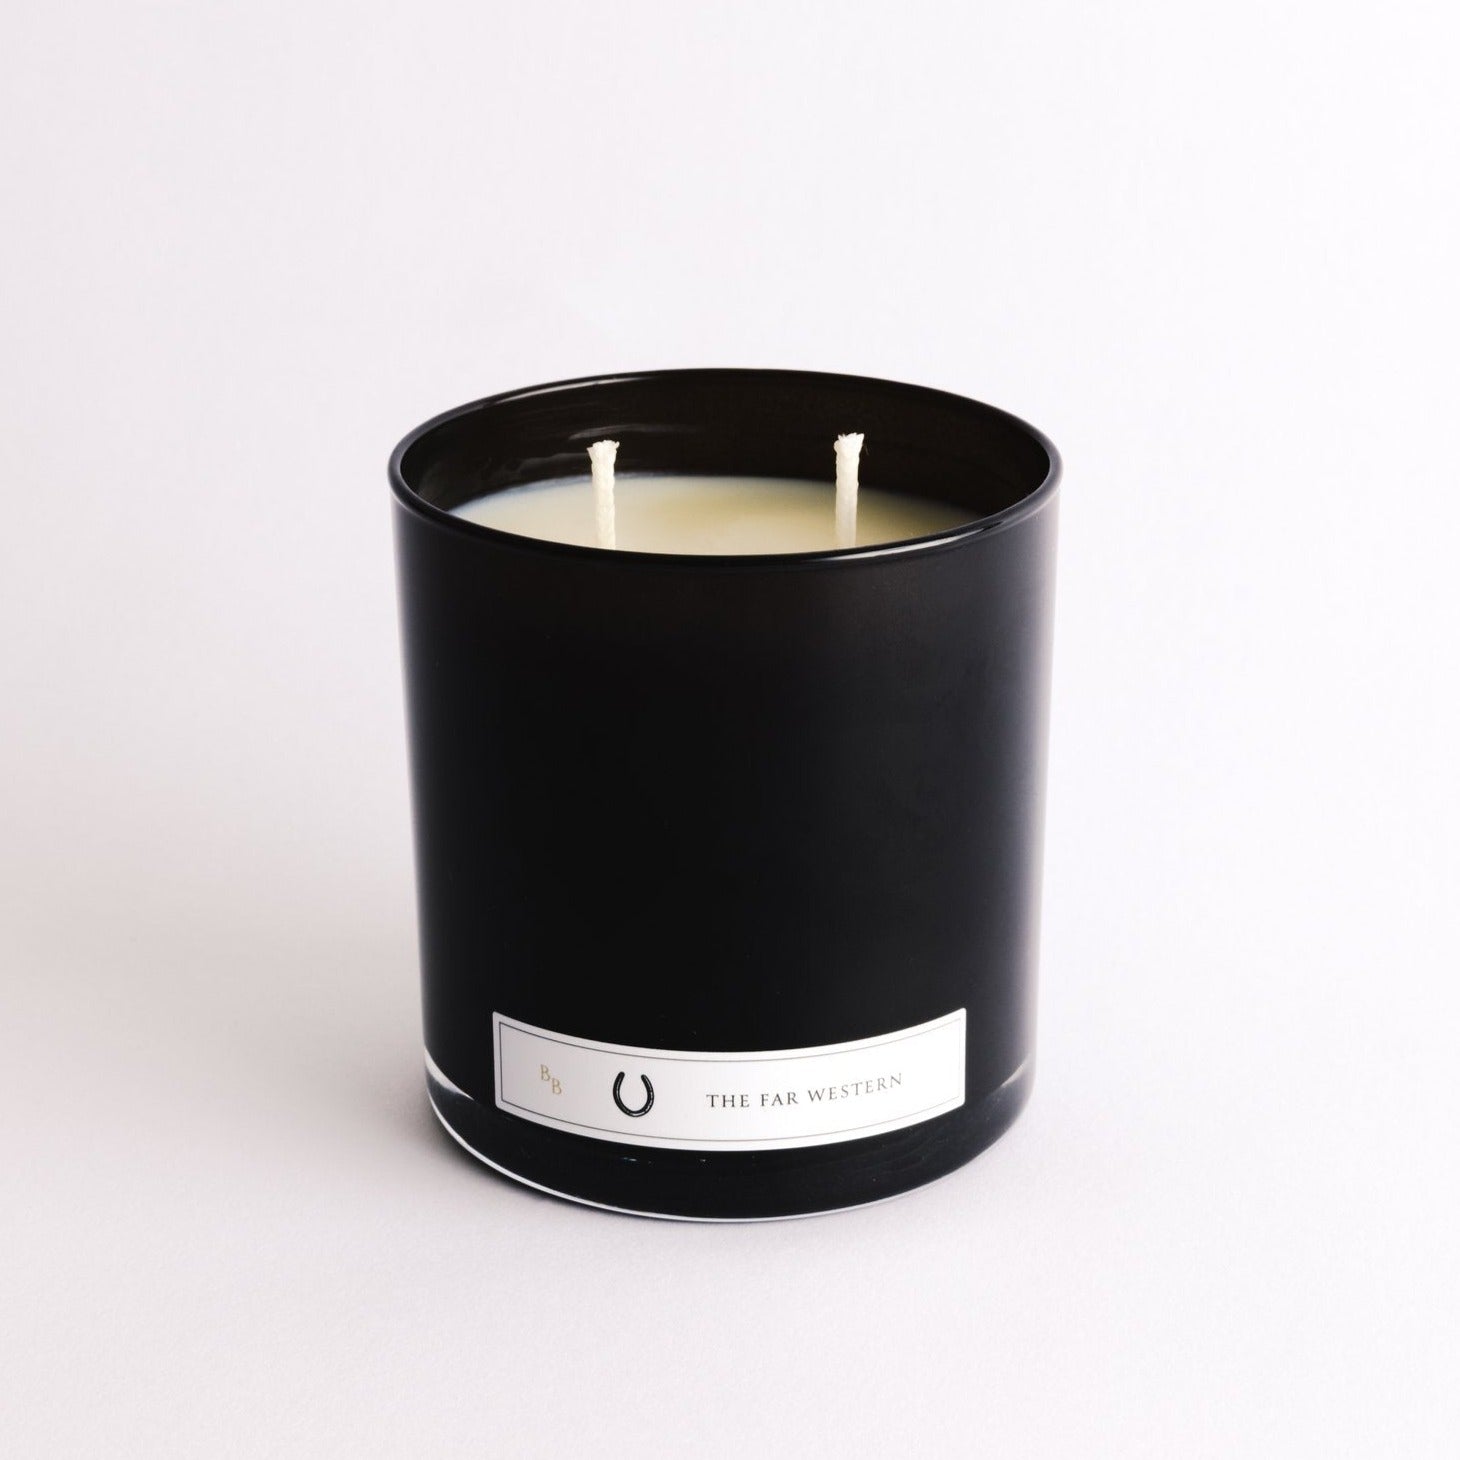 Far Western candles in black container. Two wicks